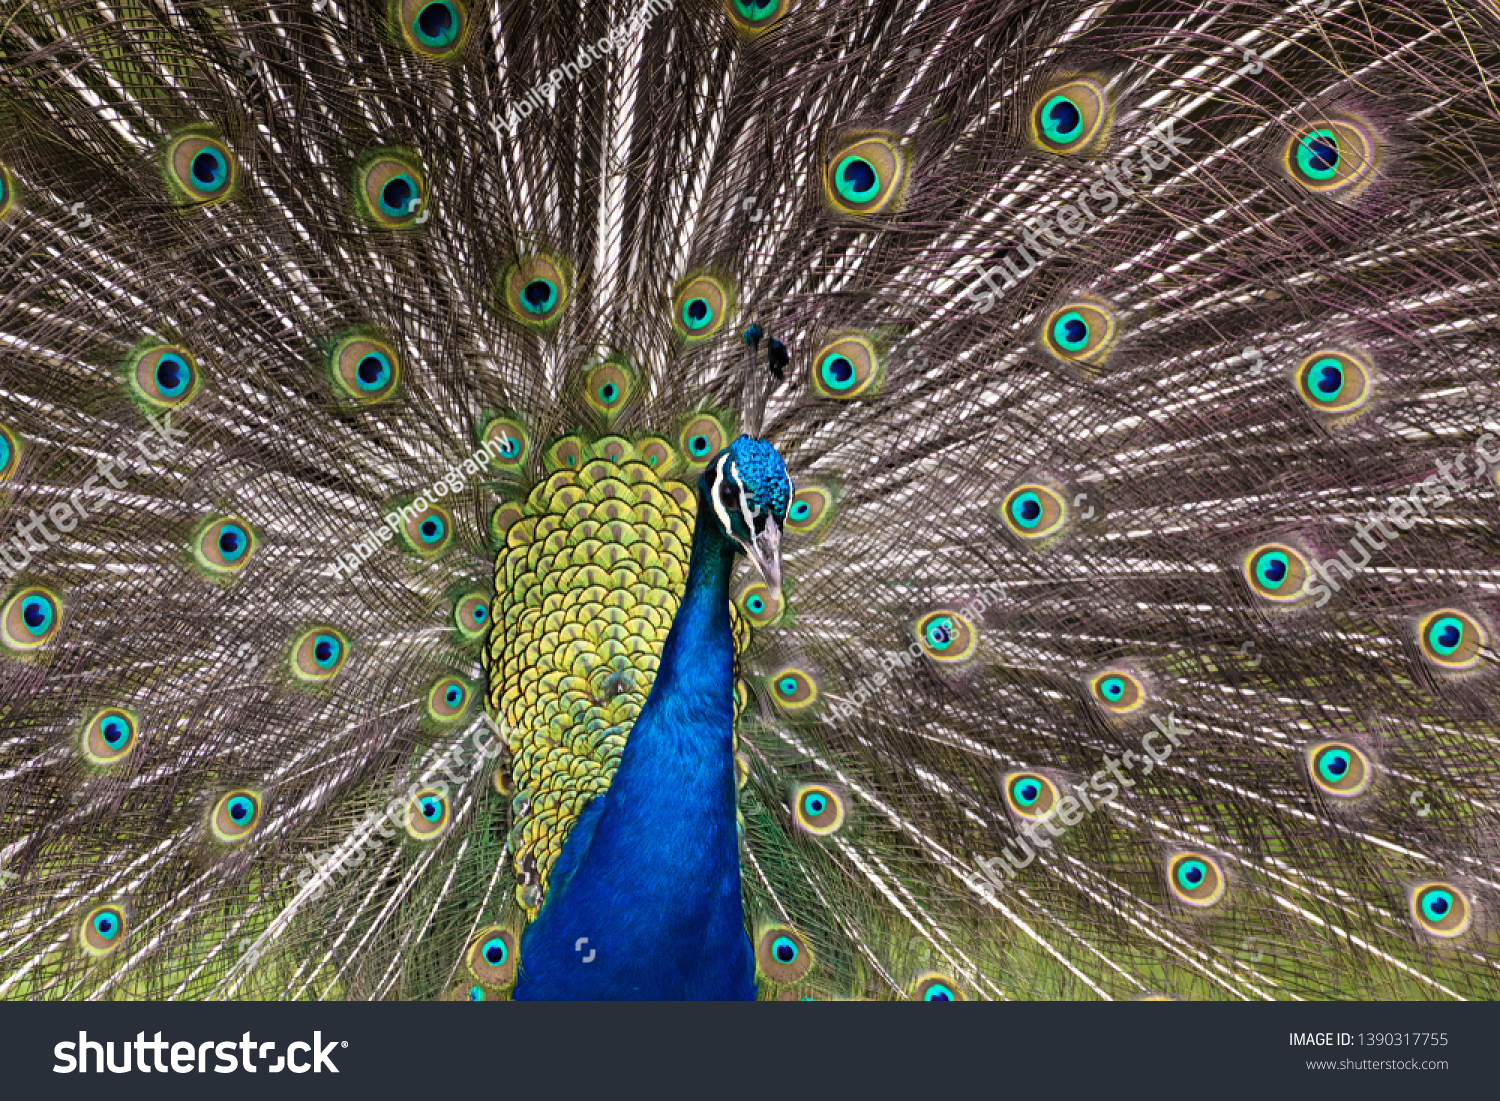 Peacock display his brightly coloured plumage #1390317755